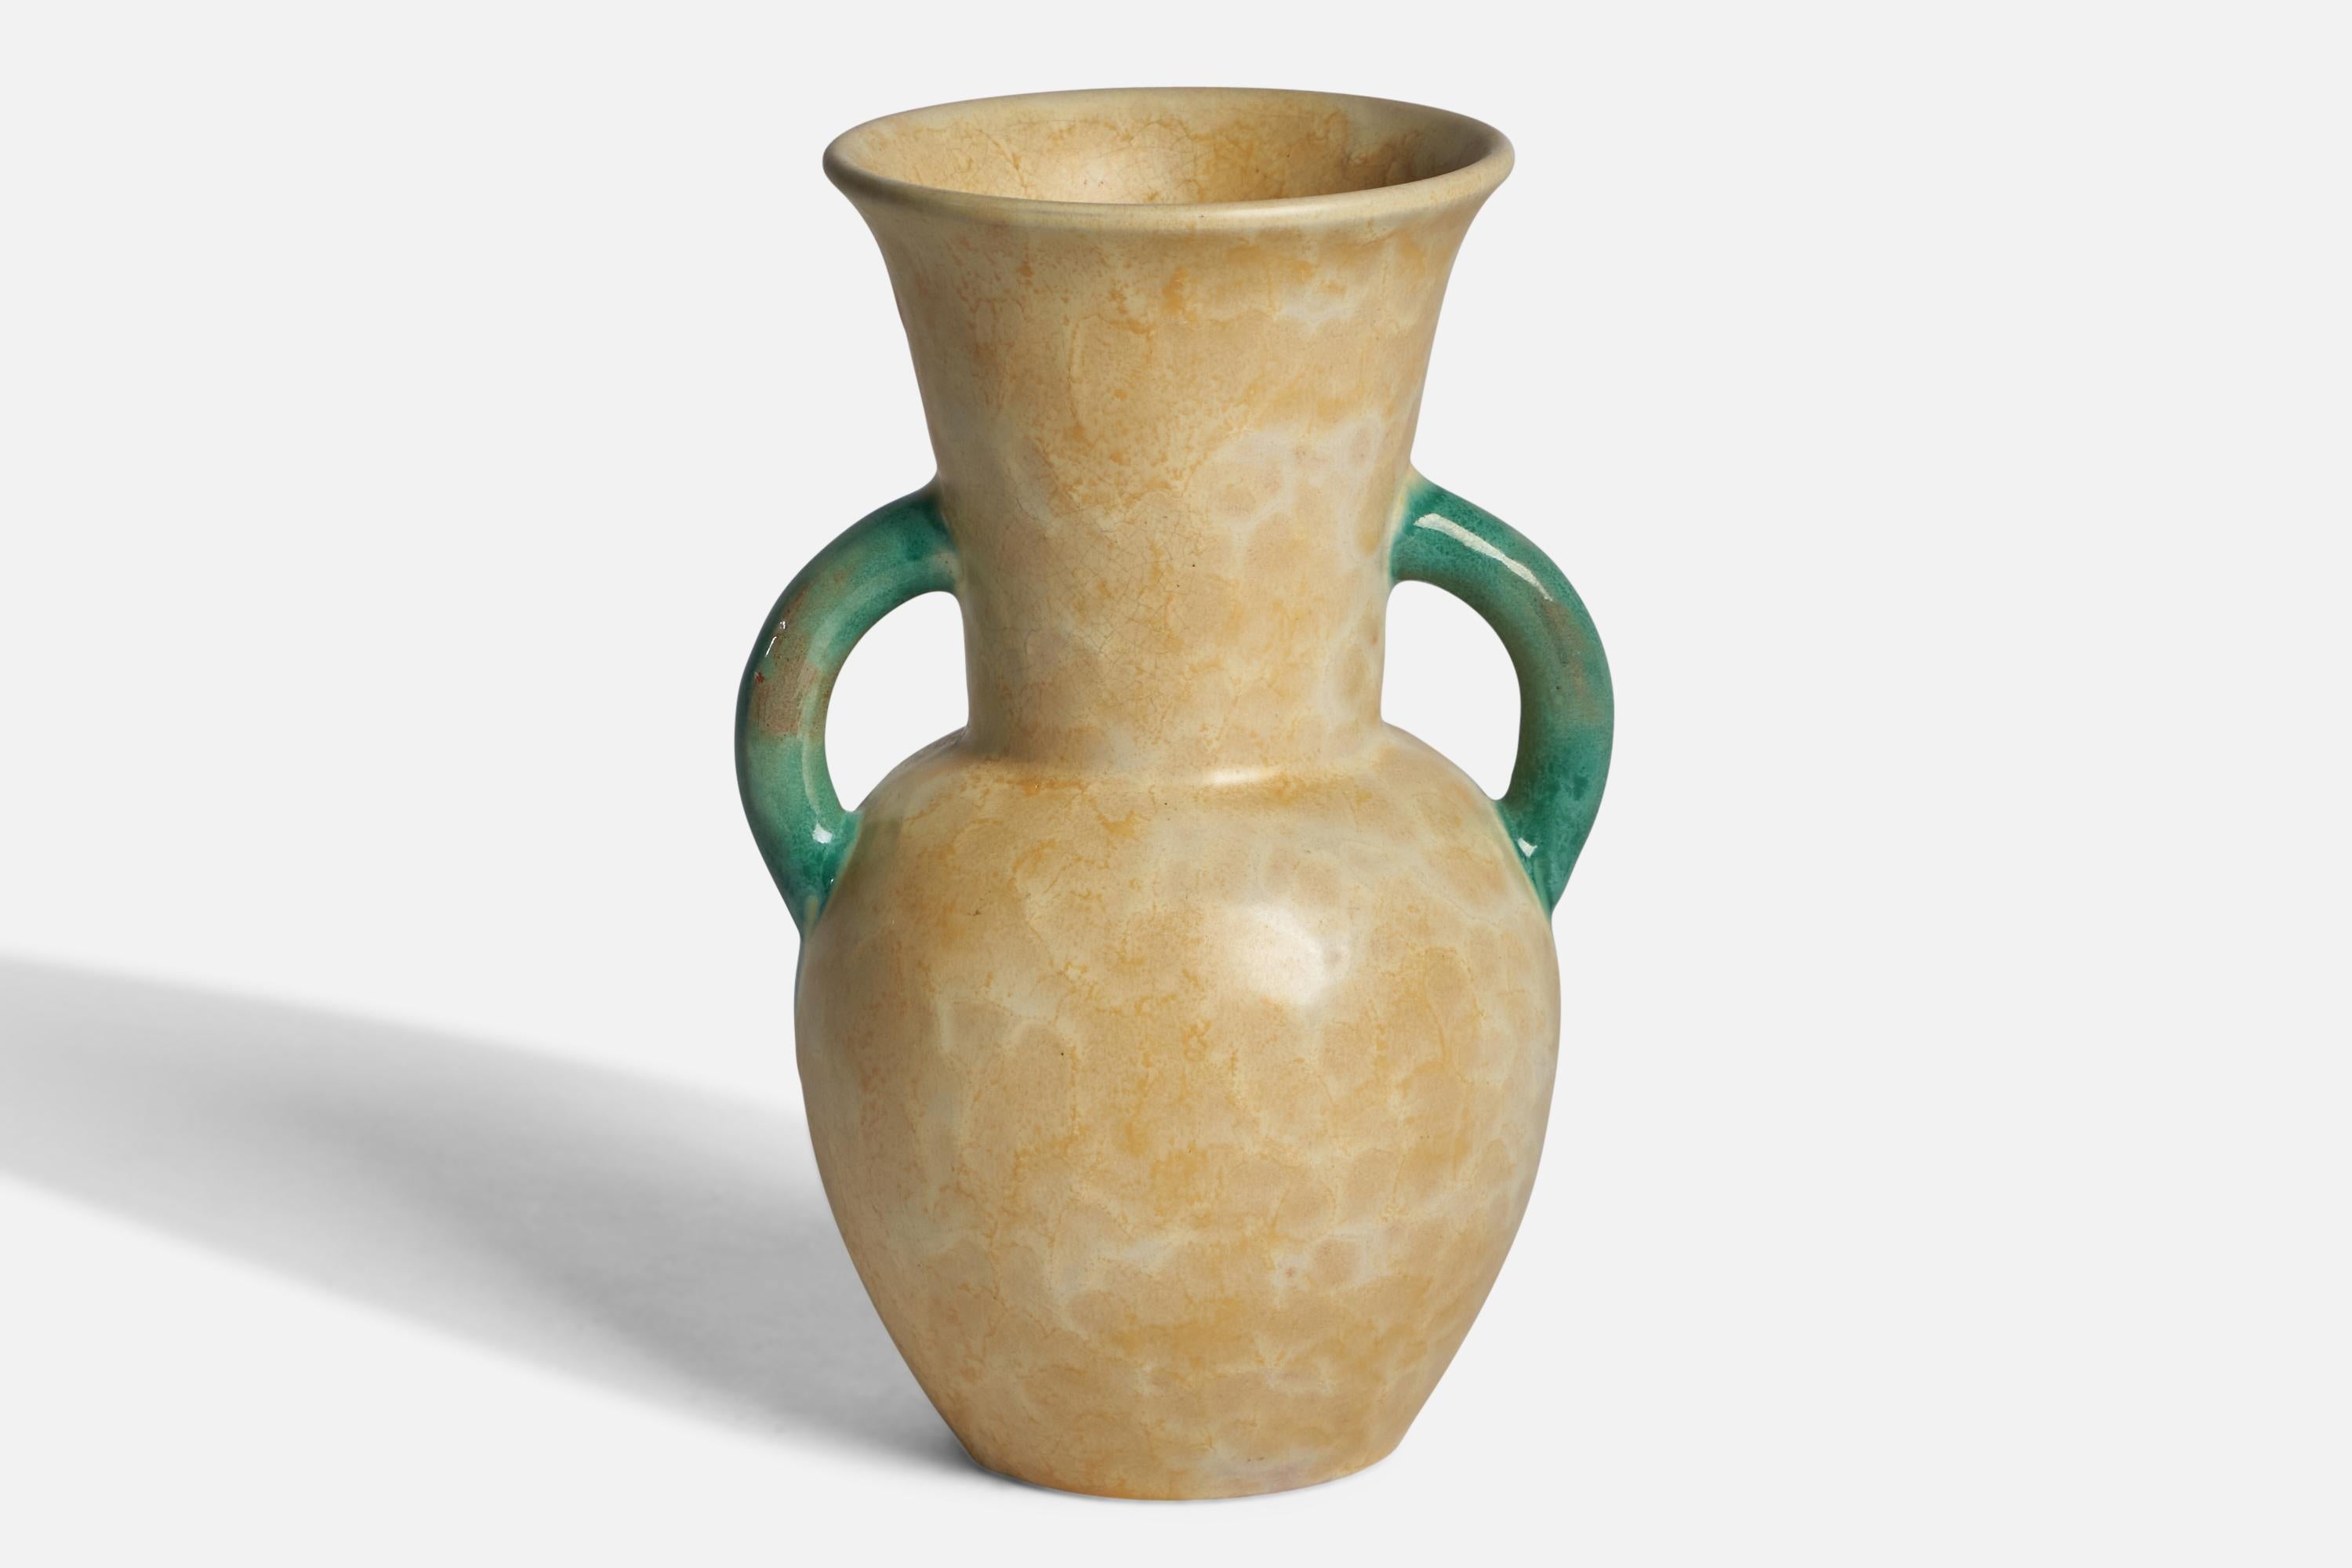 A green and yellow-glazed earthenware vase designed and produced by Upsala Ekeby, Sweden, 1930s.